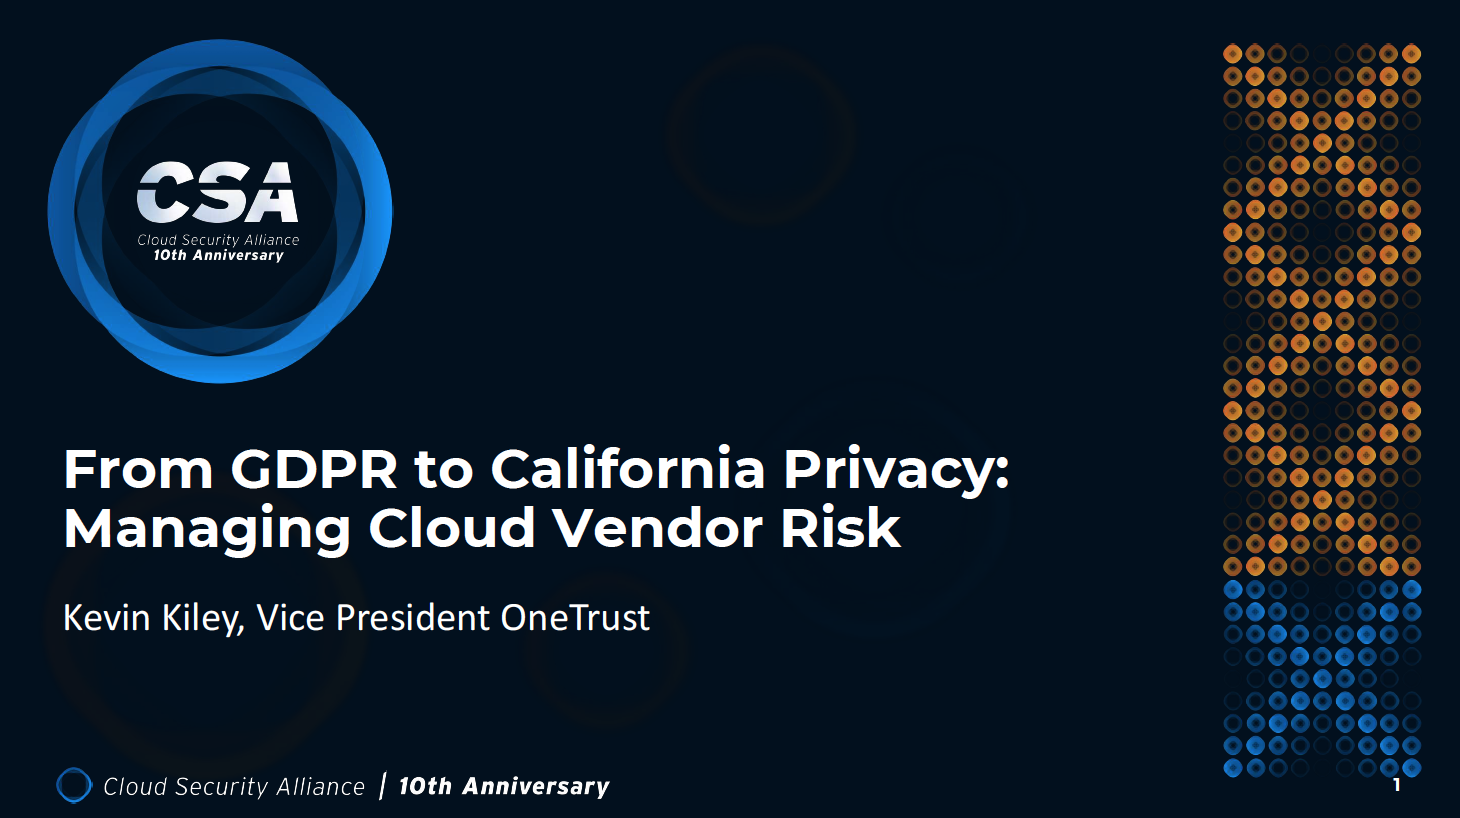 From GDPR to California Privacy: Managing Cloud Vendor Risk